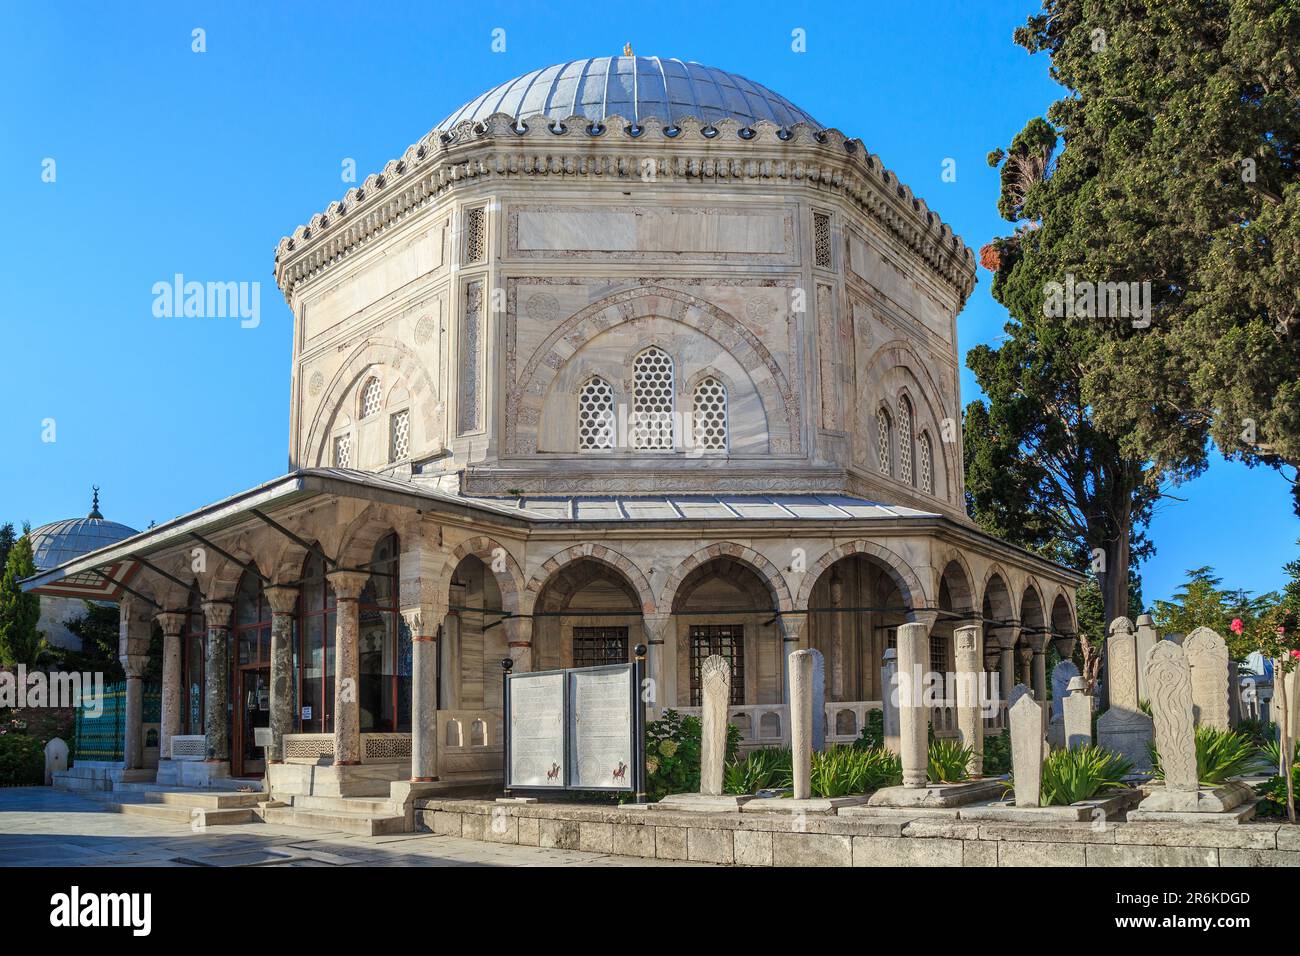 ISTANBUL, TURKEY - SEPTEMBER 14, 2017: This is the mausoleum of Sultan Suleiman the Magnificent in the cemetery near the Suleymaniye Mosque. Stock Photo